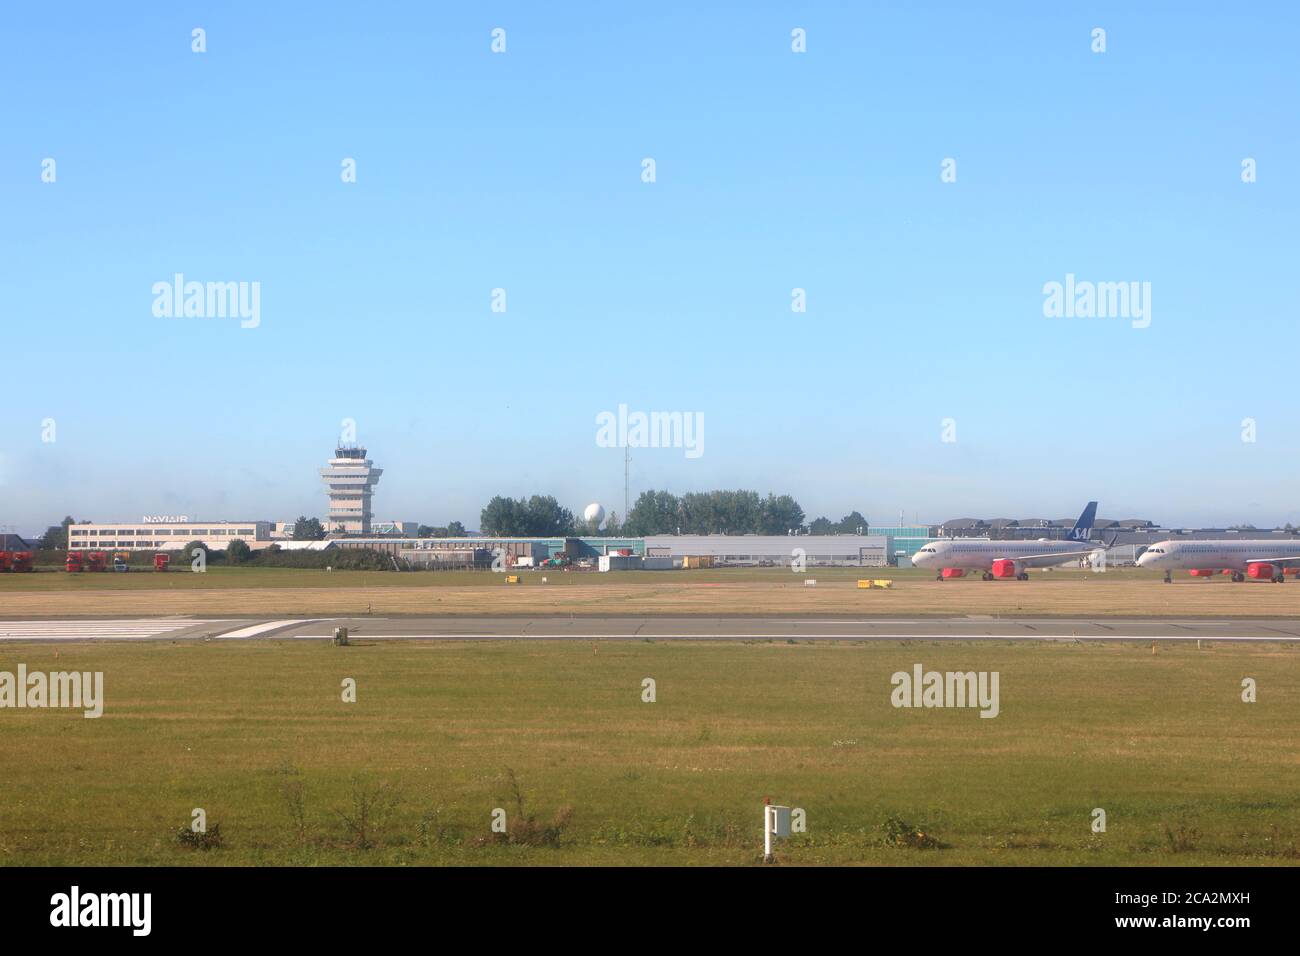 Denmark, Copenhagen airport:view of the airfield with the control tower, SAS aircrafts parked and empty runways at coronavirus time Stock Photo